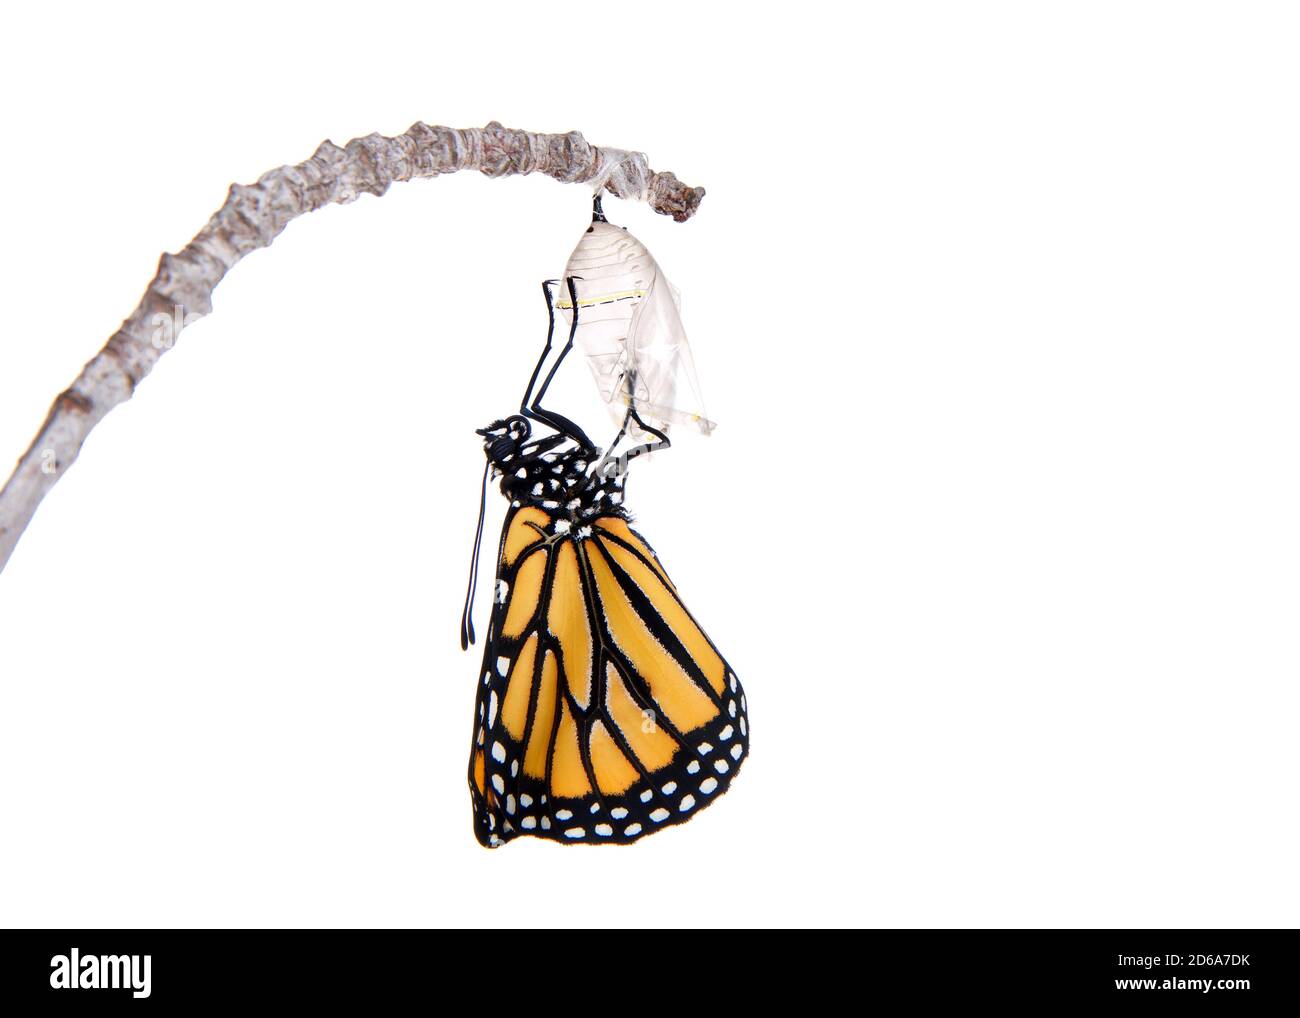 Close up of one Monarch Butterfly just emerged from chrysalis hanging on a small branch, wings bent from confinement.  Isolated on white. Stock Photo